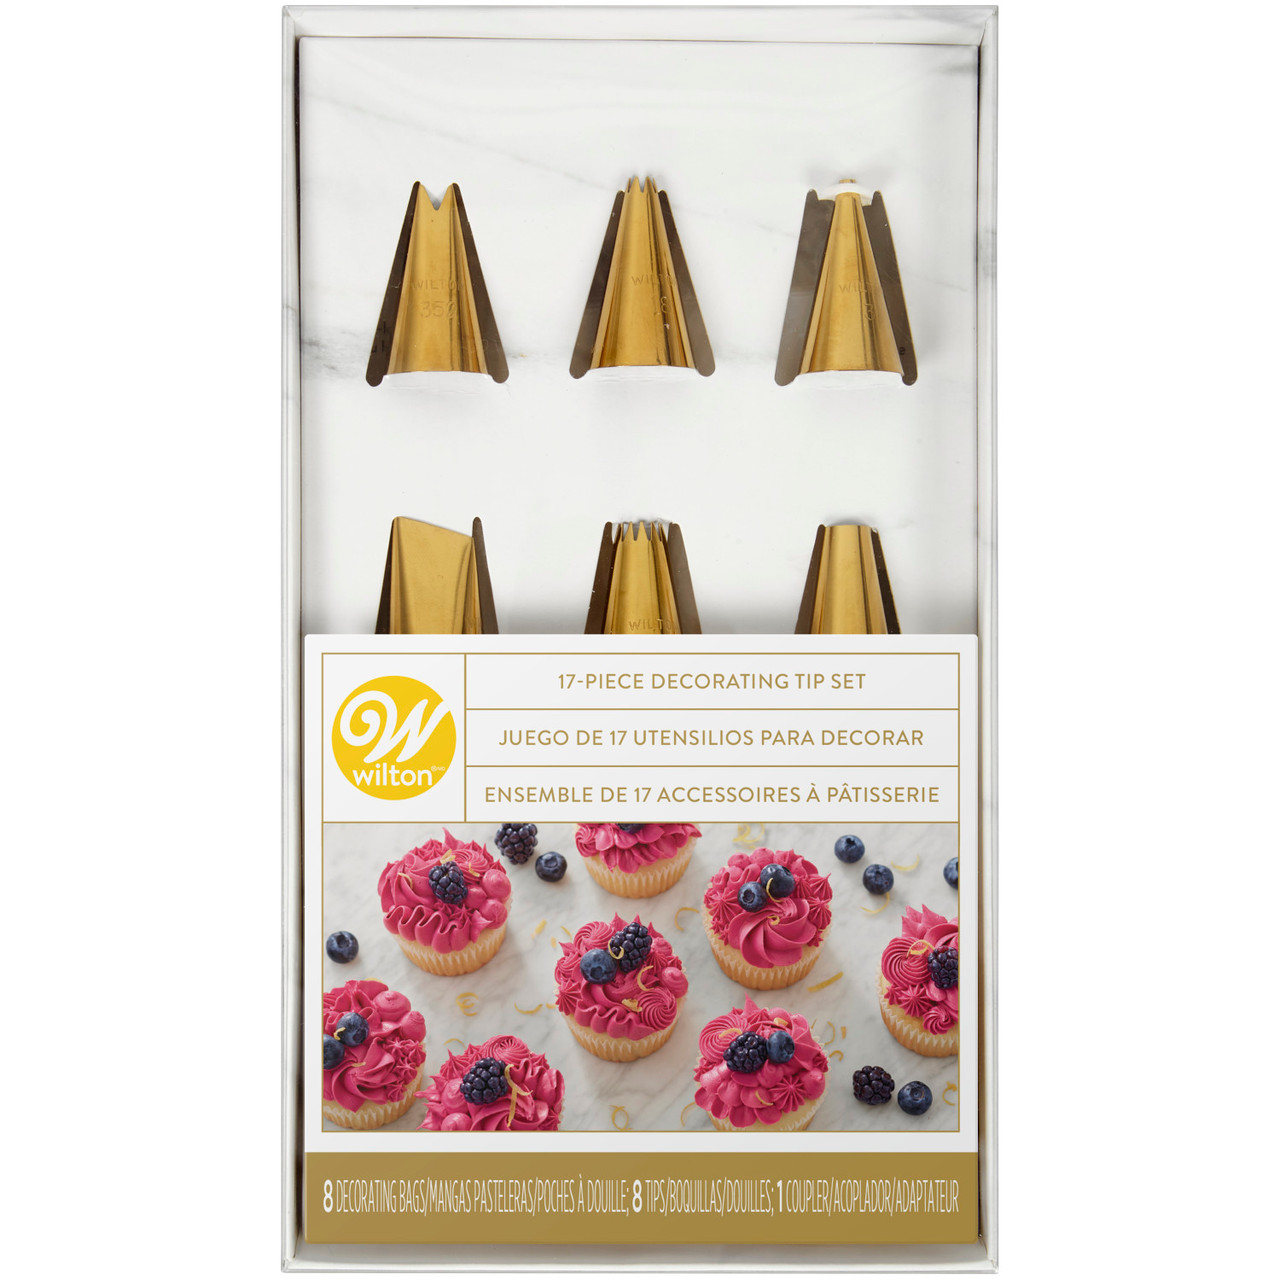 Navy Blue and Gold Piping Tips and Cake Decorating Supplies Set, 17-Piece -  Wilton